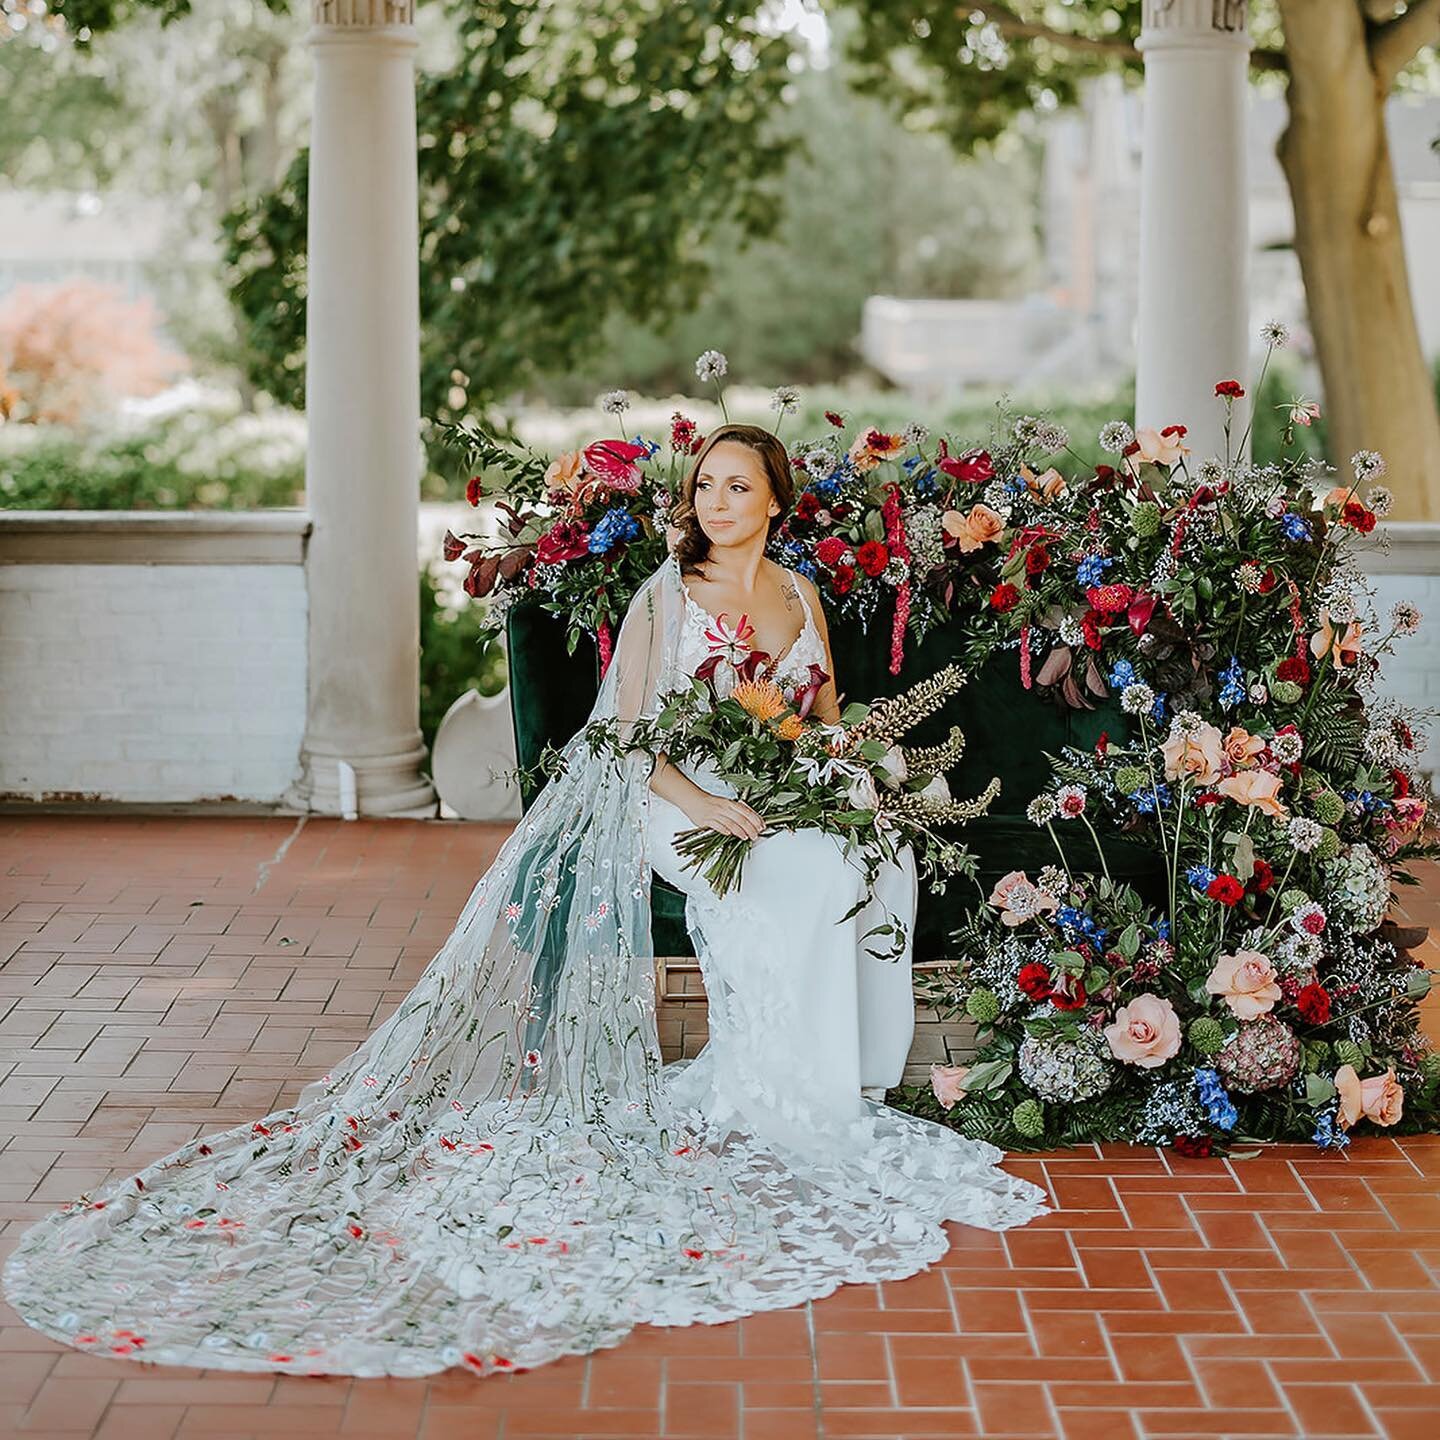 ✨ VISION ✨

We&rsquo;re OBSESSED with this gorgeous styled shoot from the incredible vision of @dreamweddingswi and brought to life with the help of an amazing creative team, including the beautifully joyful couple of dreams @opeitsmahoney and @_nata